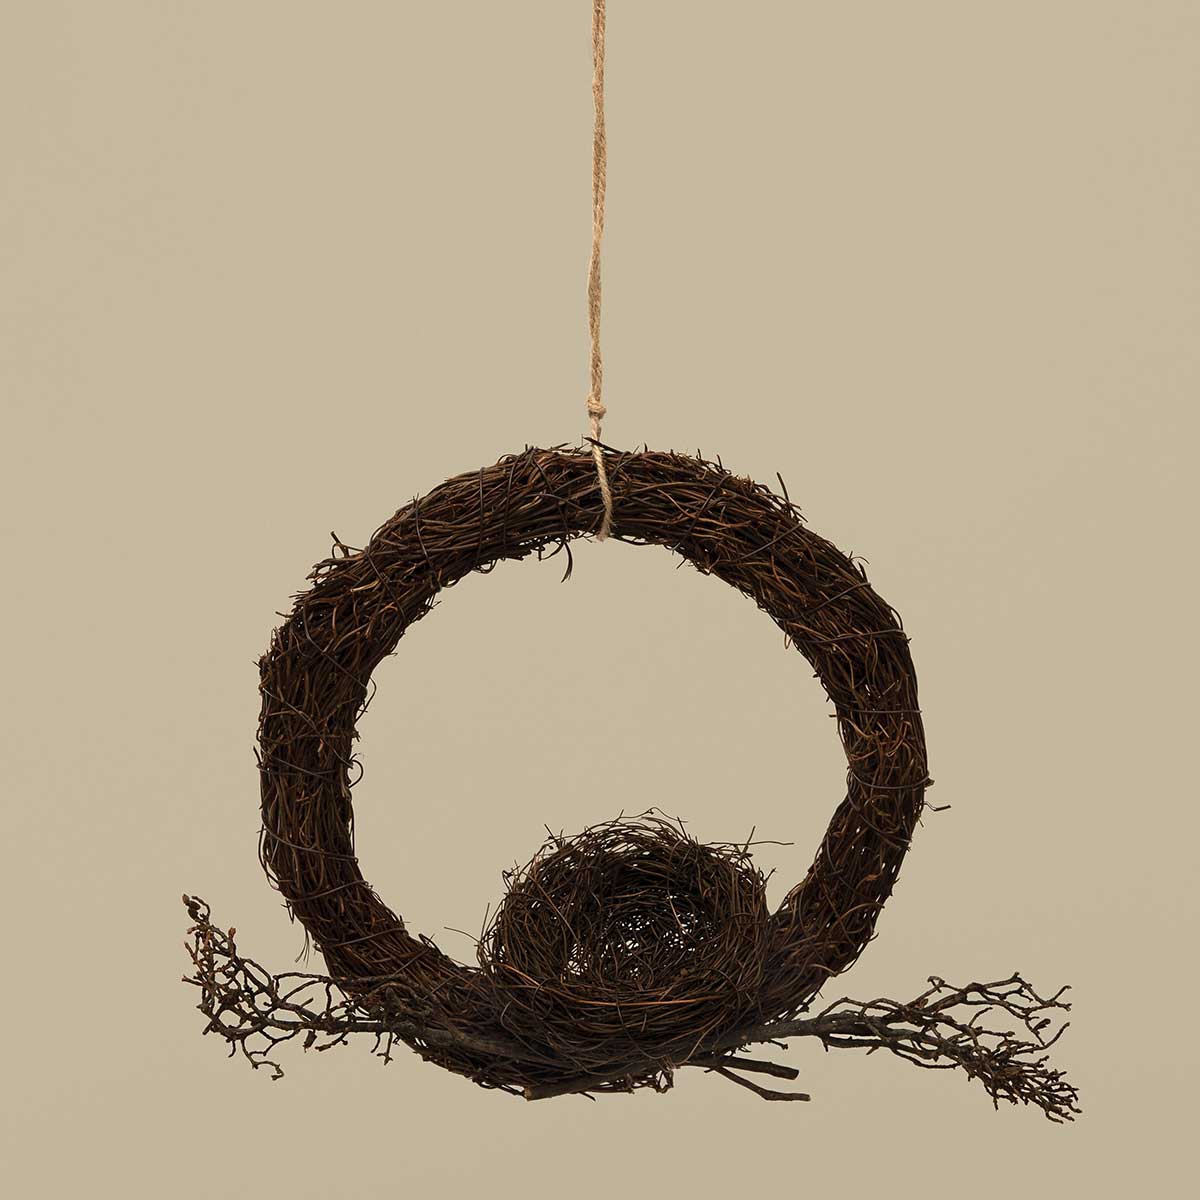 NESTINGS TWIG WREATH WITH NEST AND TWINE HANGER 11"X9.5"